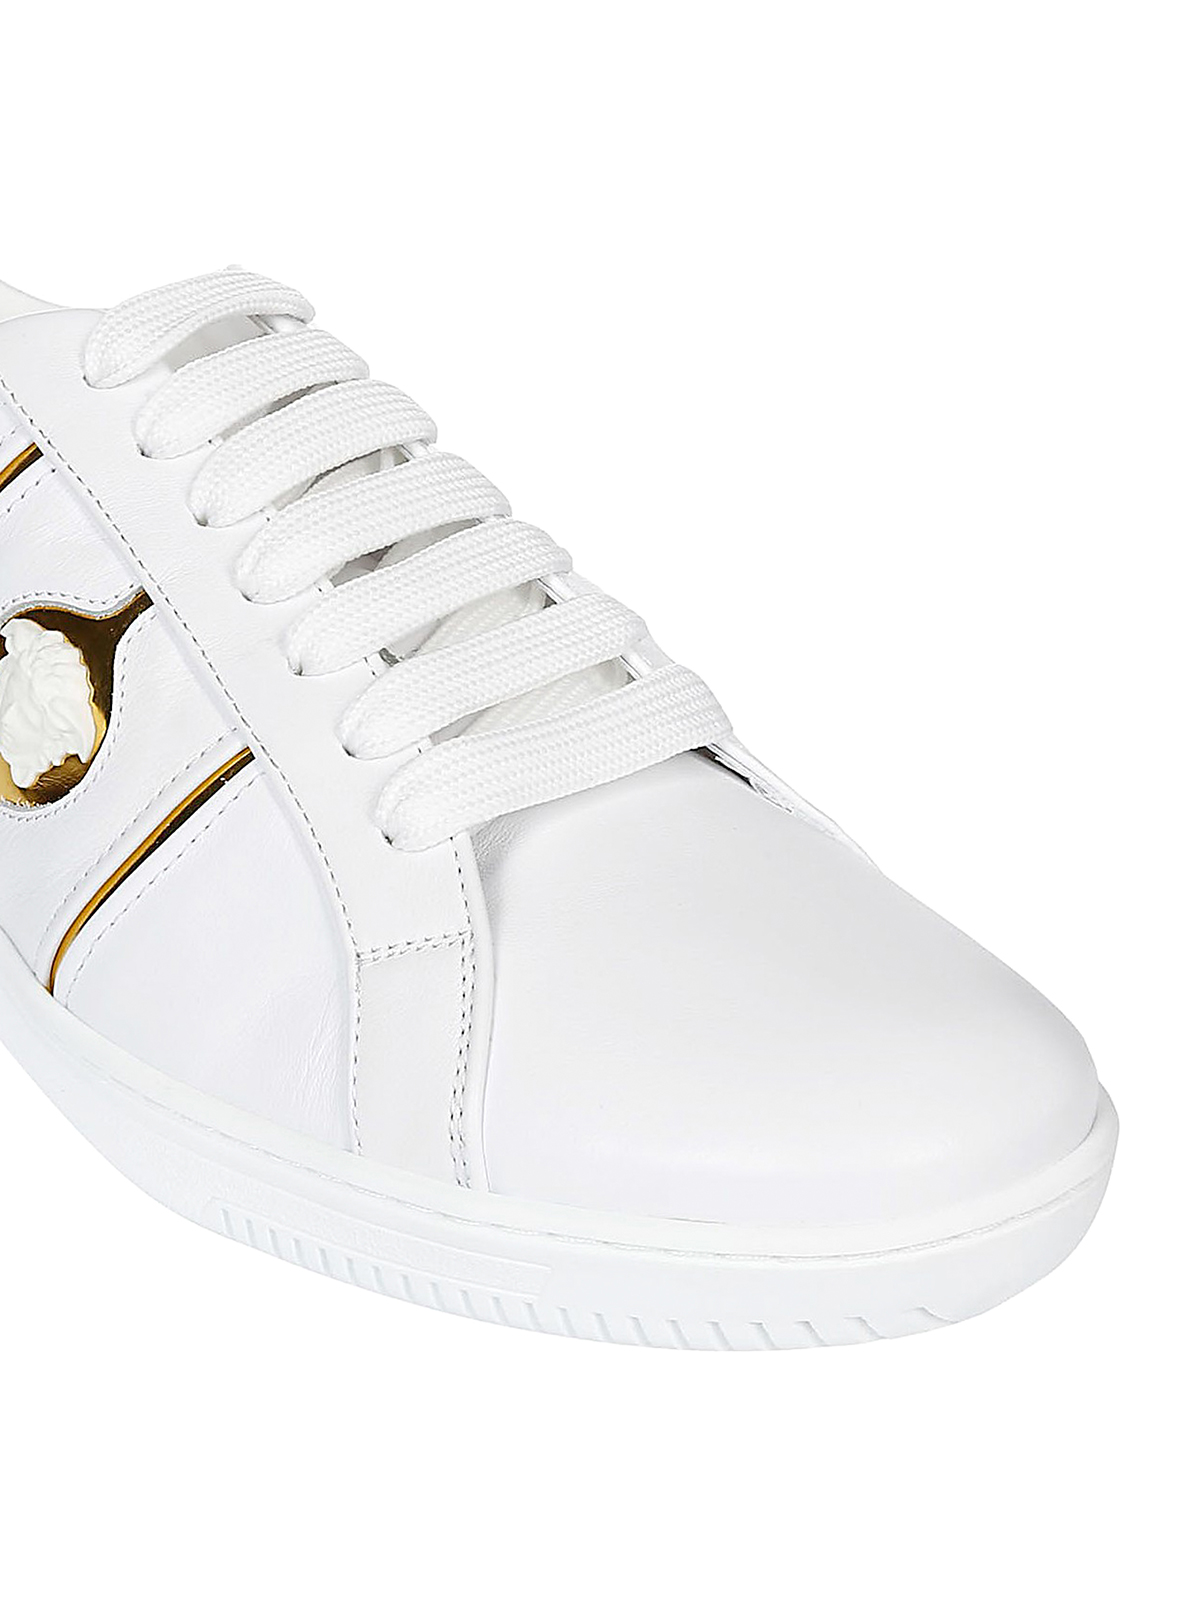 Versace - Martin white leather sneakers 